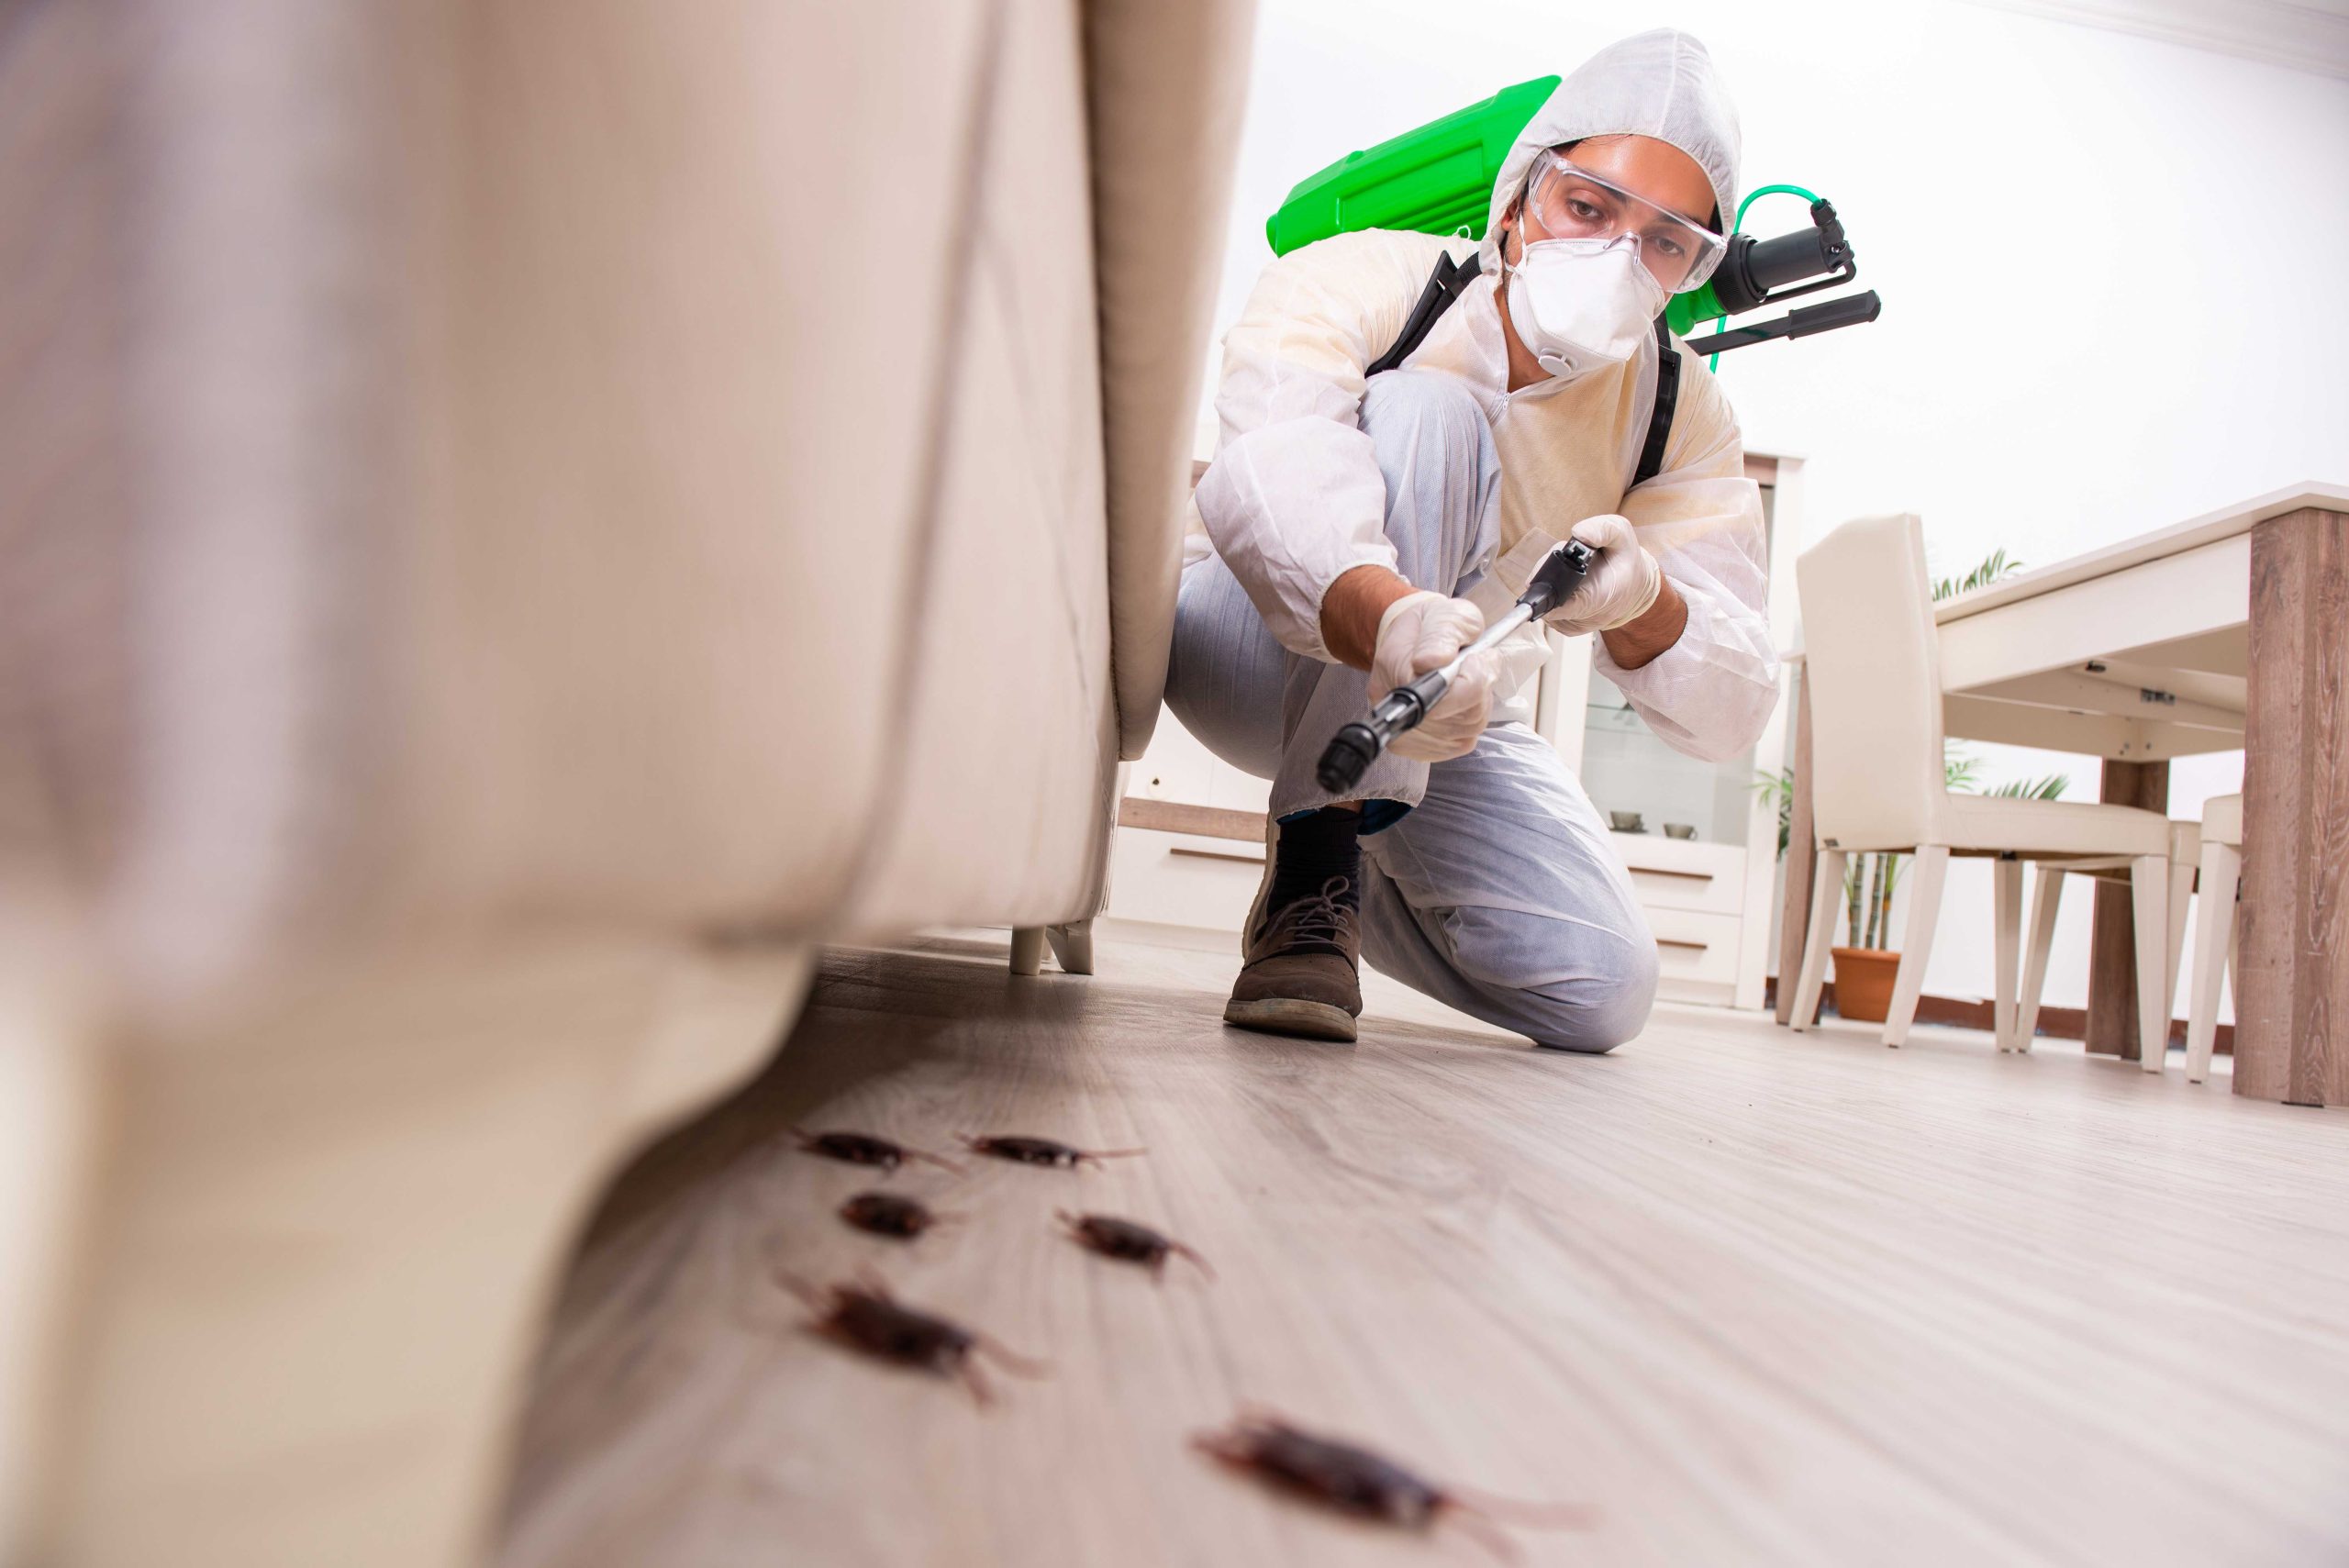 Pest-Control experts in Riverwoods, Illinois specializing in prevention and eradication of various pests. Don't let pests damage your property and endanger your health.